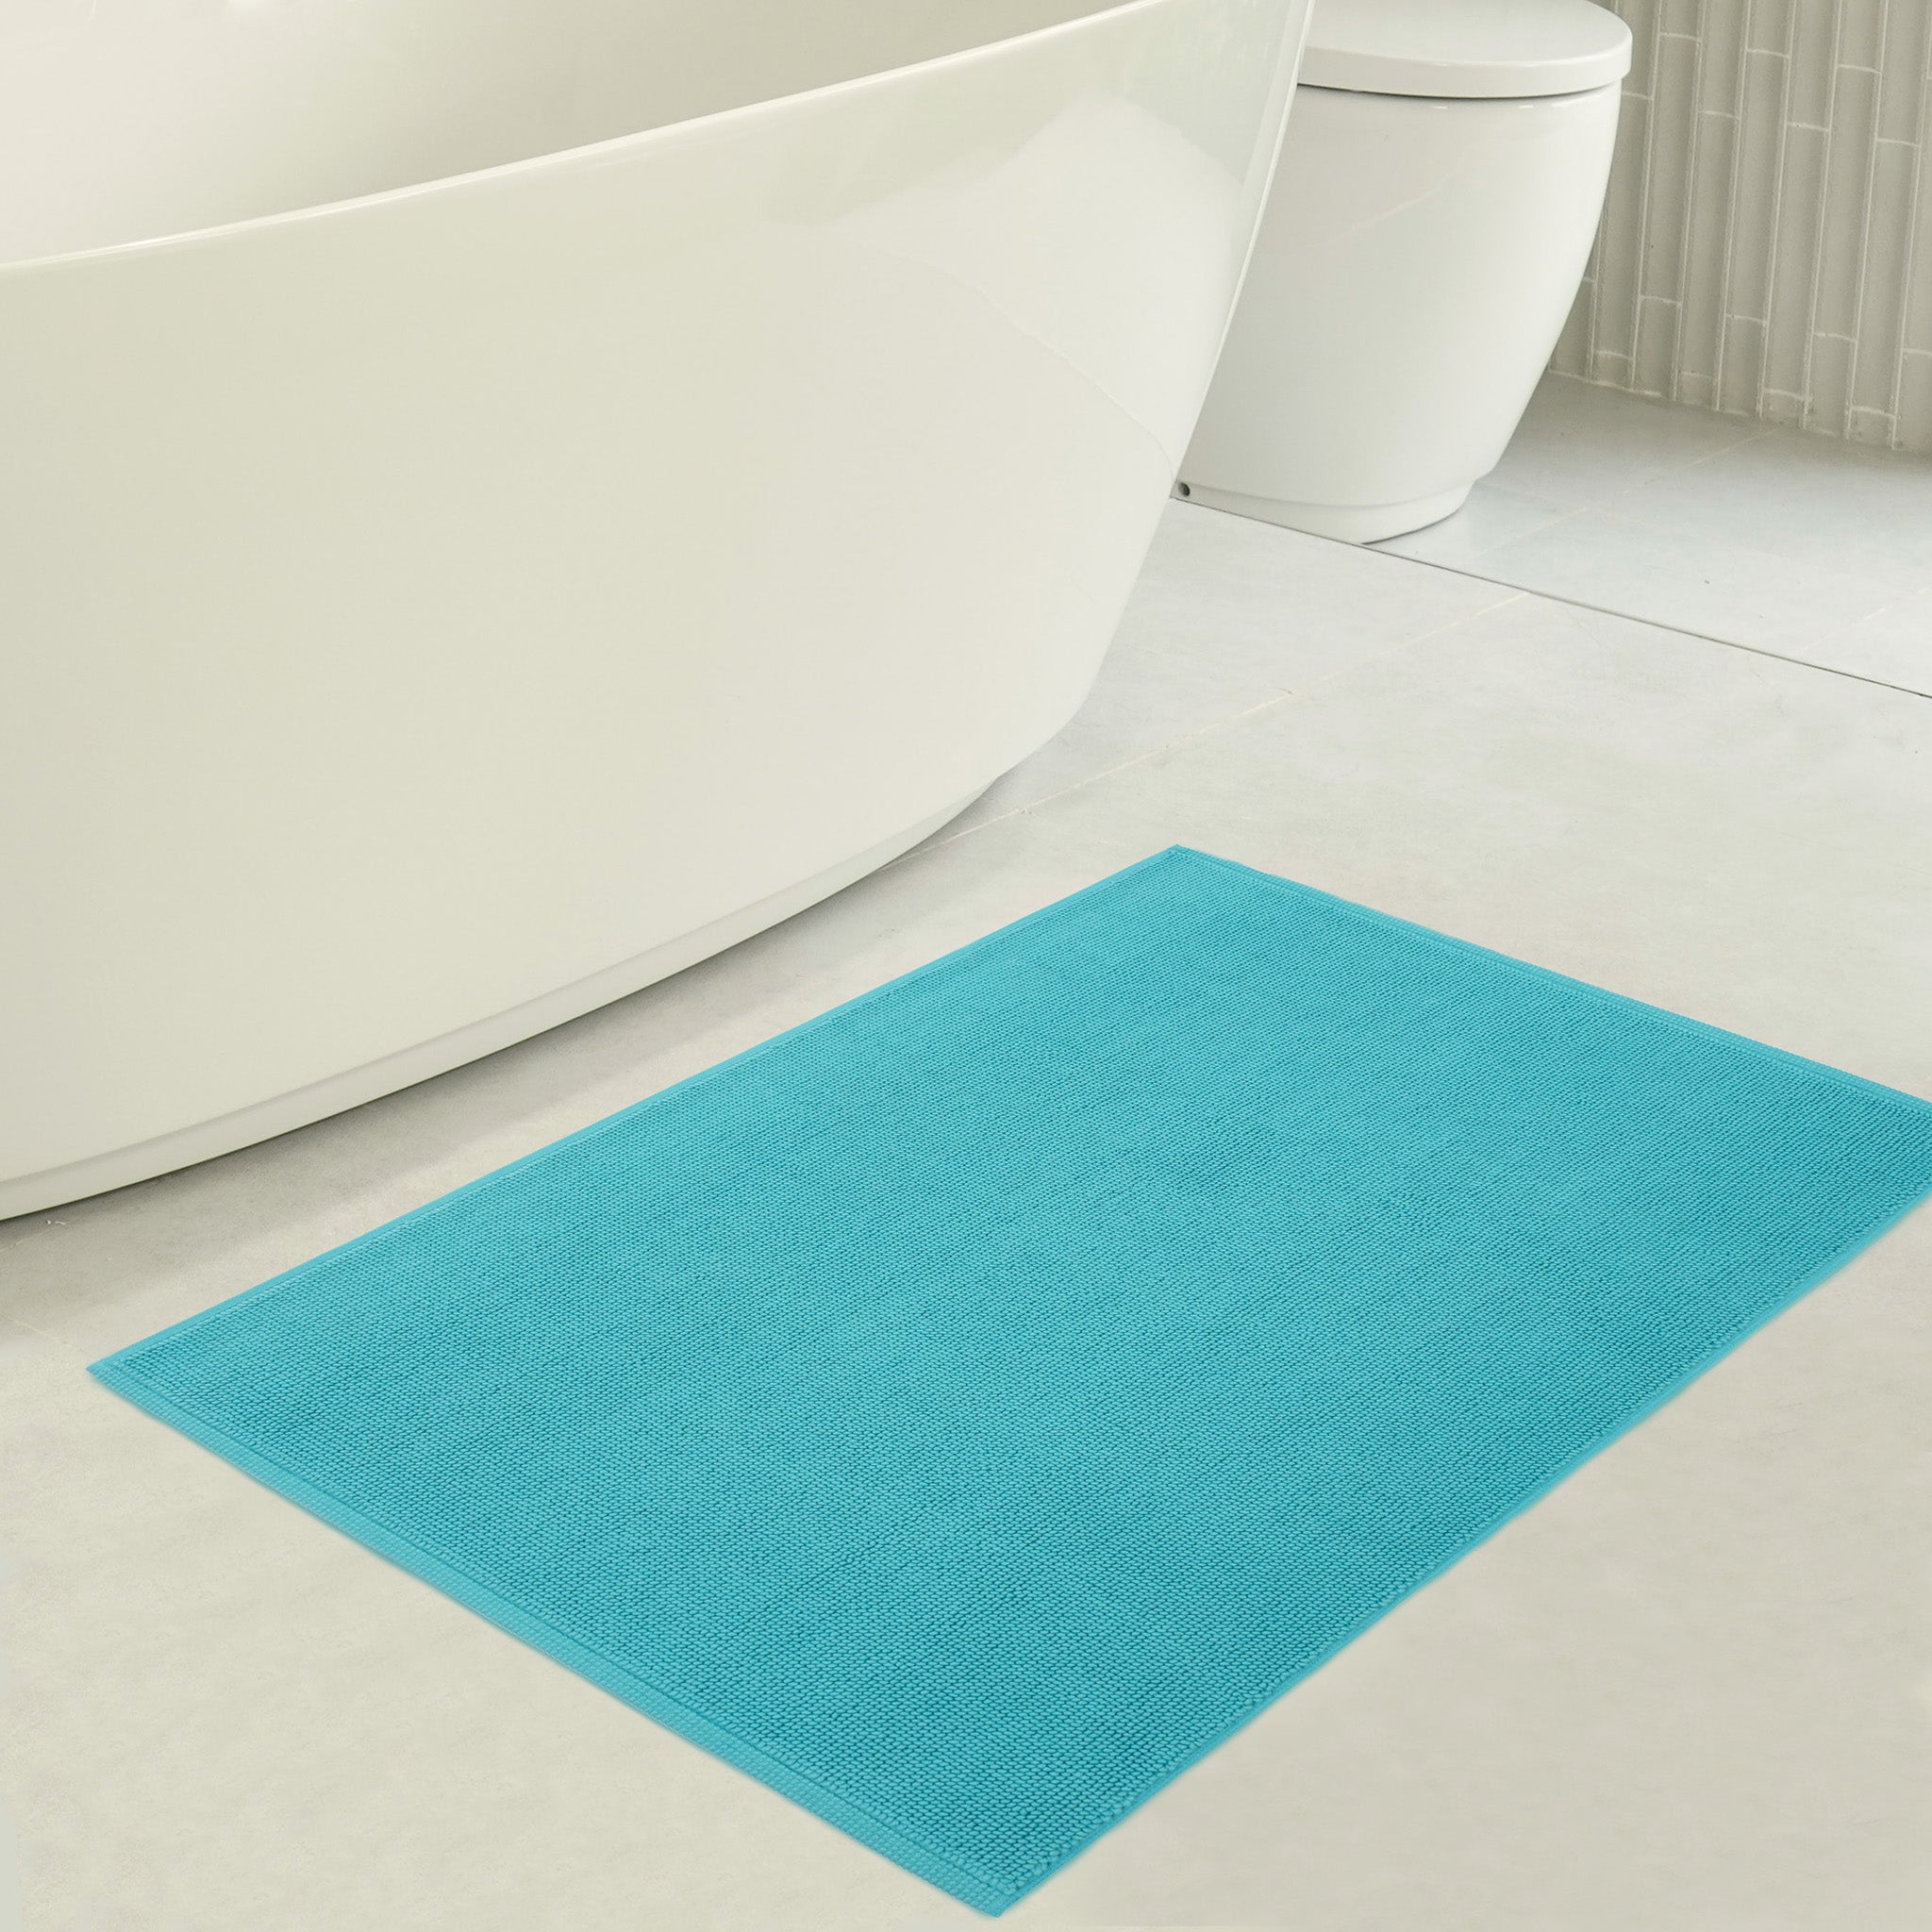 American Soft Linen Non Slip Bath Rug Turkish Cotton 17x24 Inches Soft Absorbent Bath Mat Rugs - Turquois Blue